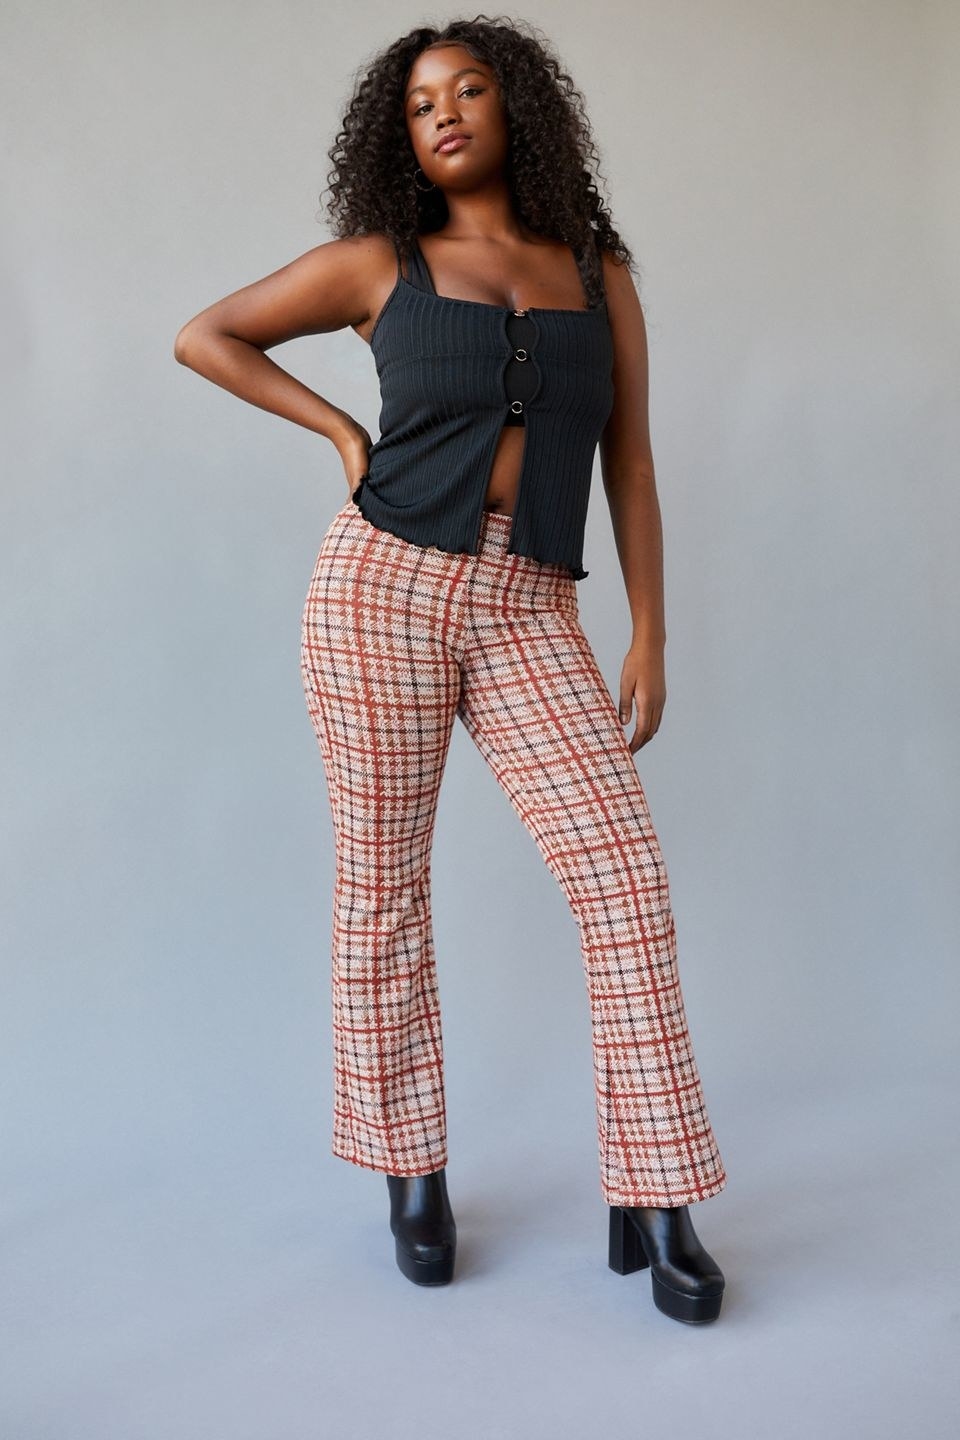 A model in the white, rust, and black plaid pants